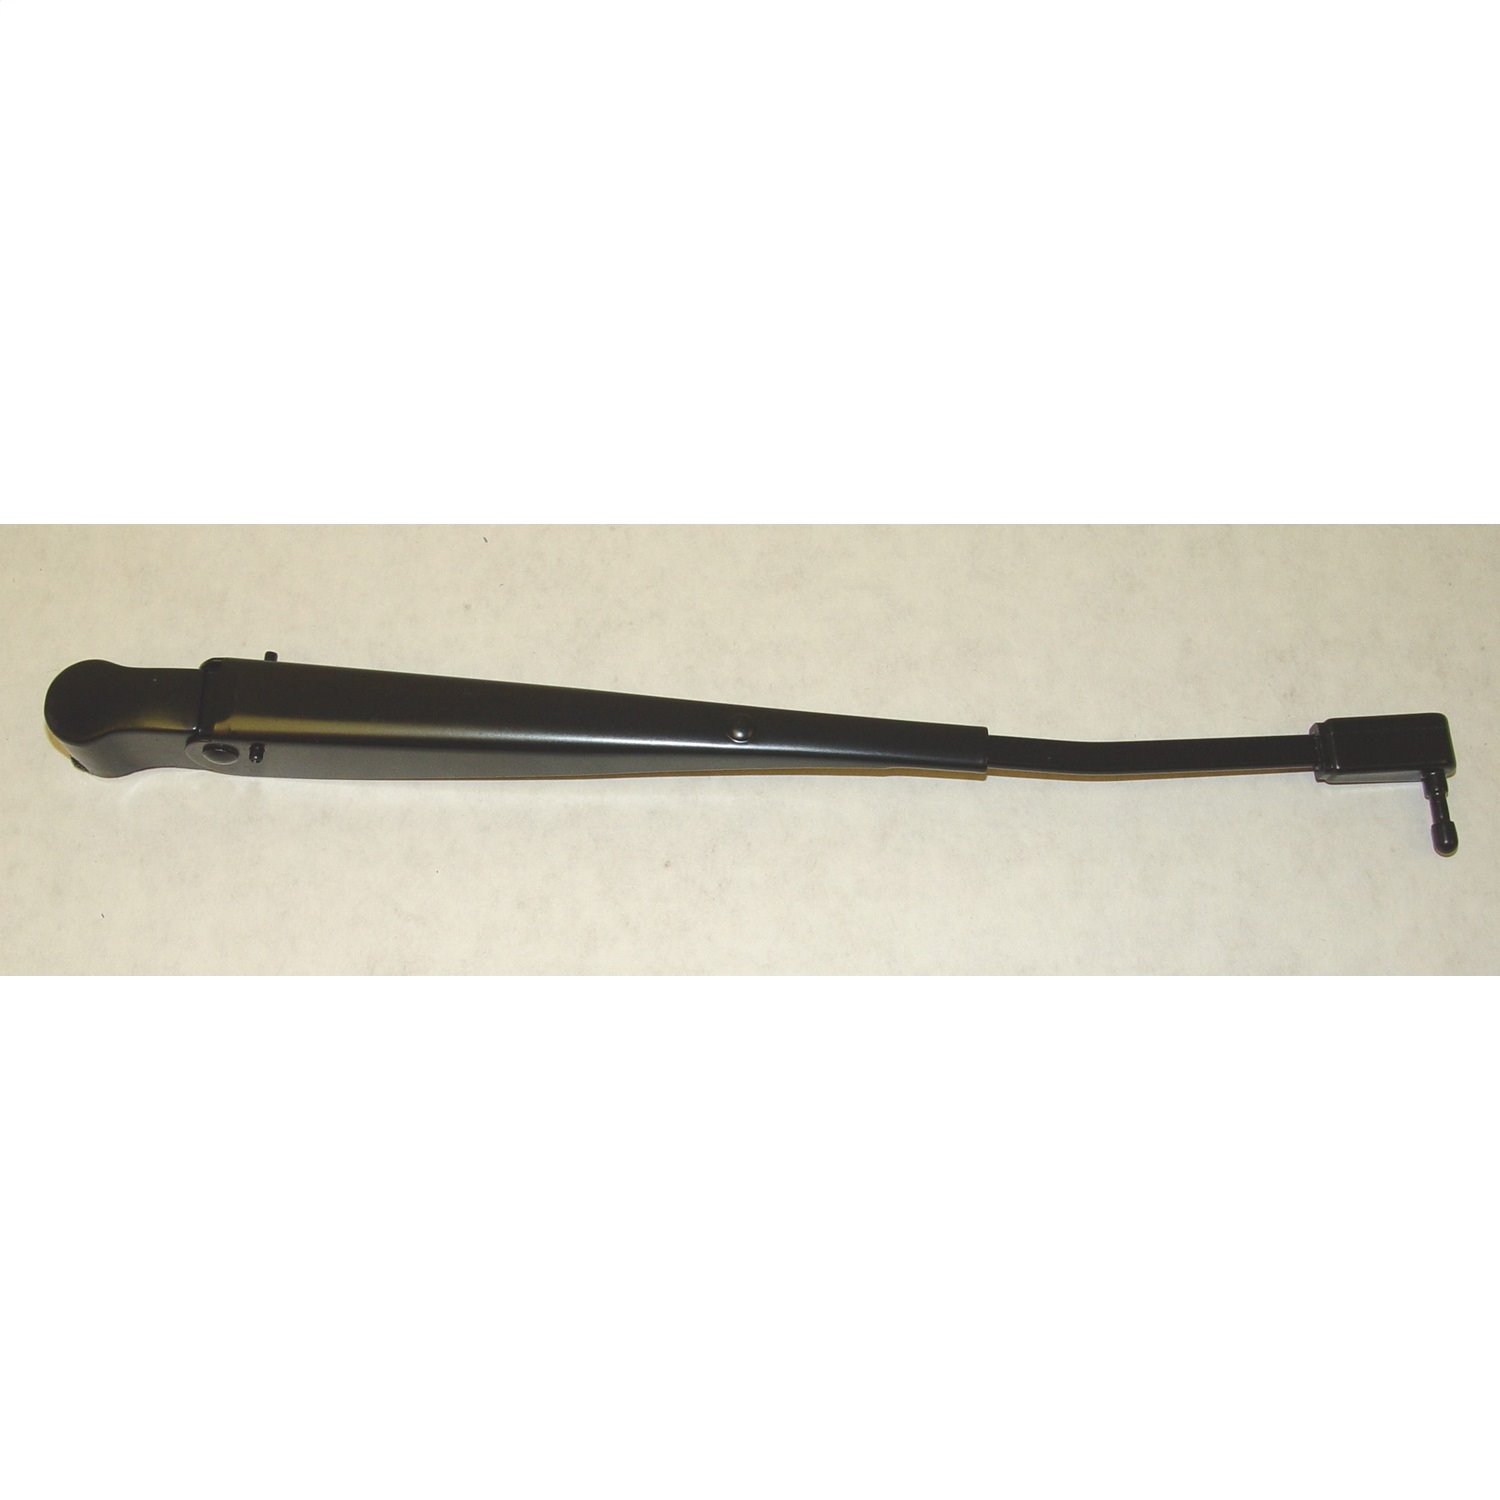 Replacement windshield wiper arm from Omix-ADA, Fits 87-95 Jeep Wrangler YJ